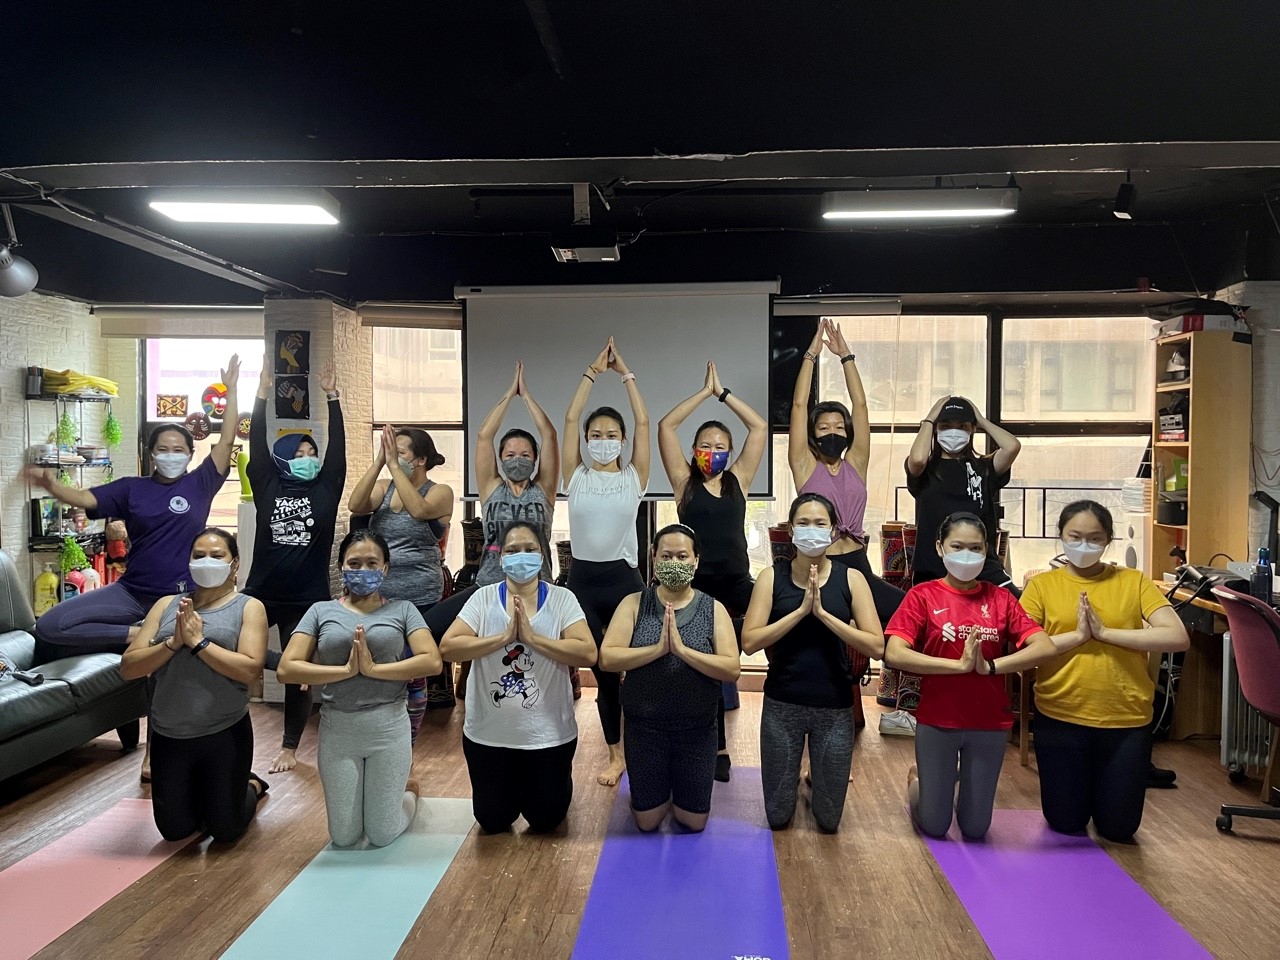 A yoga session led by those supporting migrant workers helps this vibrant community to increase their confidence and build social connections.